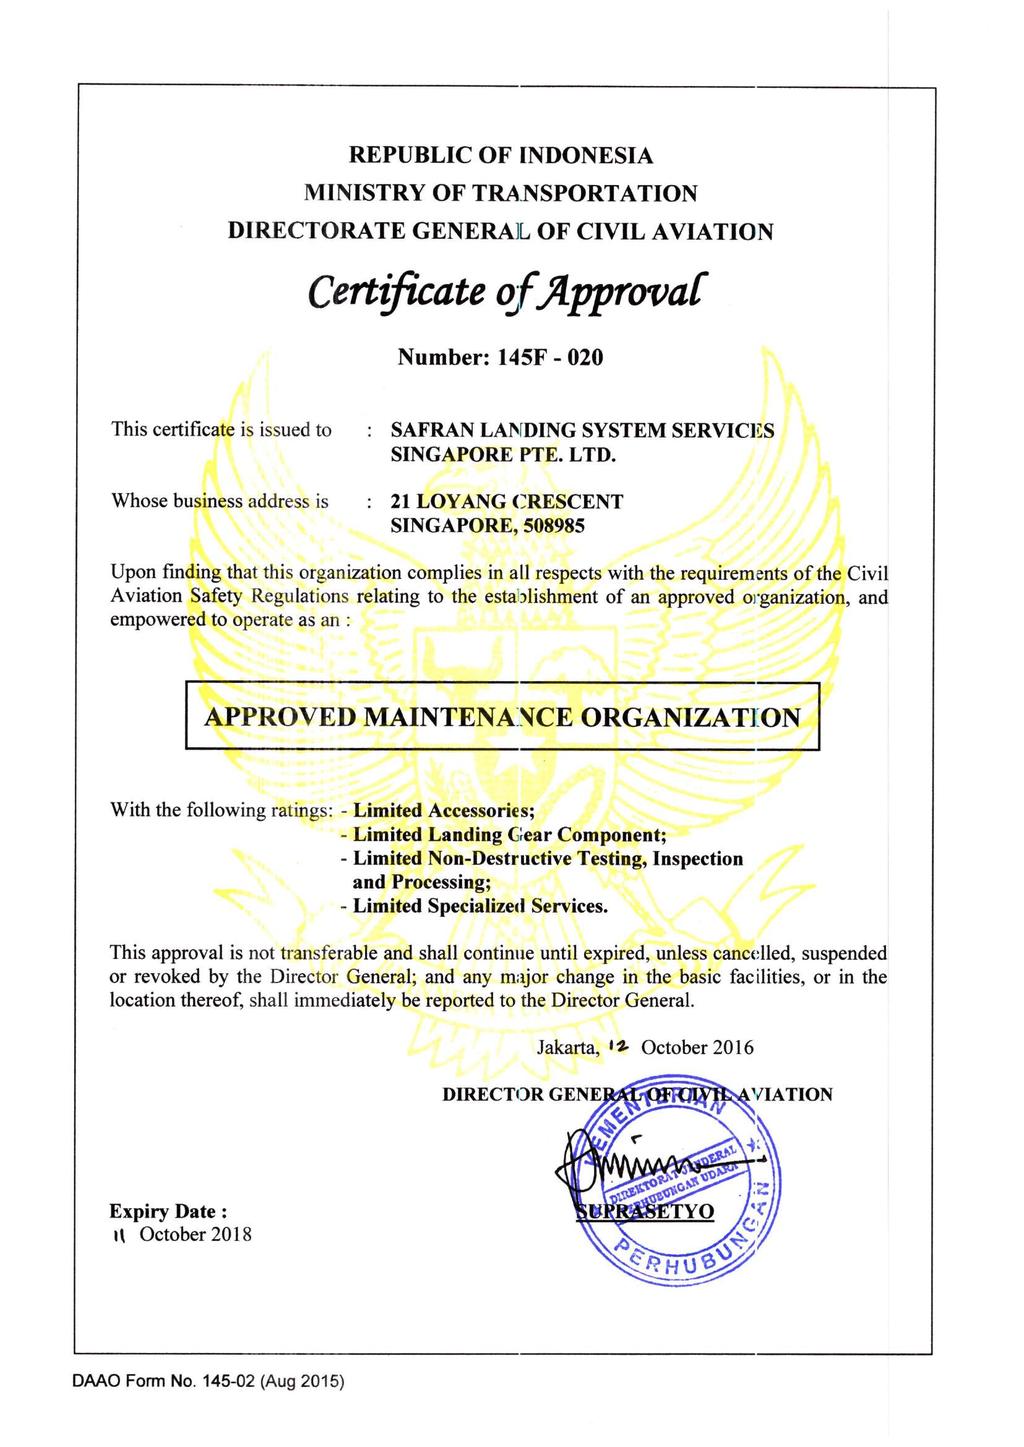 REPUBLIC OF [NDONESIA MINISTRY OF TRA NSPORTATION DIRECTORATE GENERAIL OF CIVIL AVIATION Certificate ofapprovac Number: 145F - 020 This certificate is issued to : SAFRAN LANDING SYSTEM SERVICICS